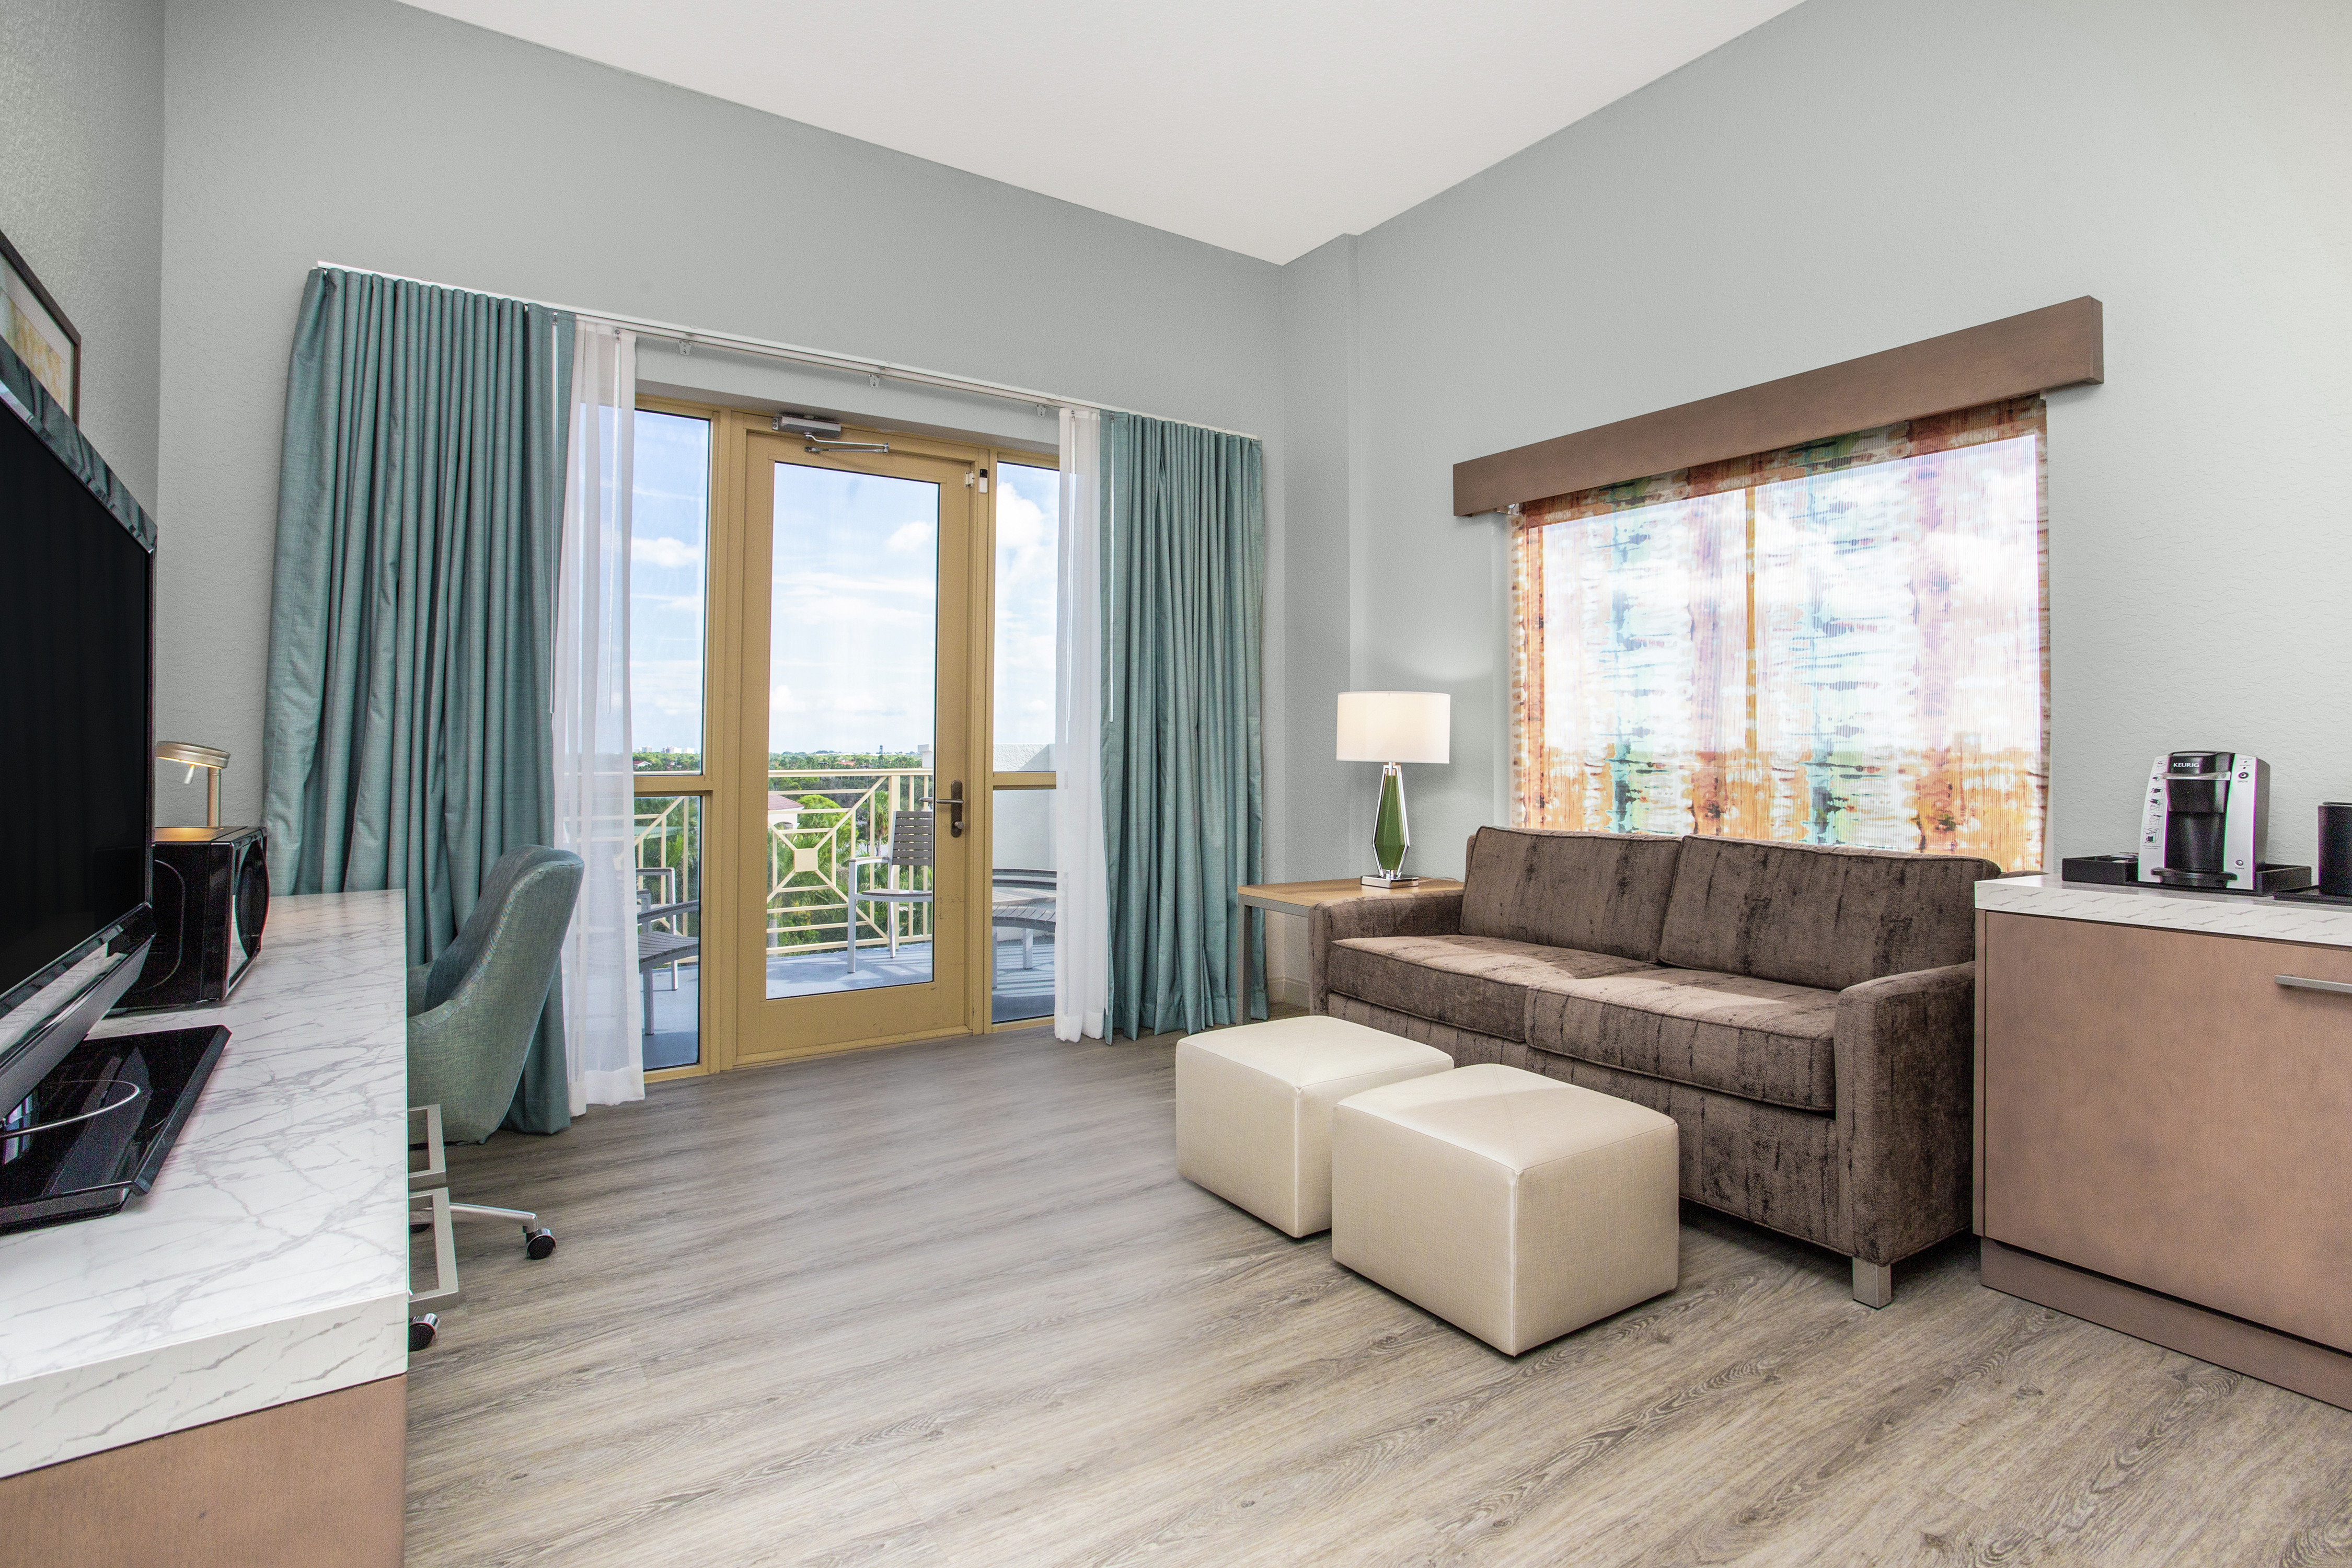 King Junior Suite Guestroom with Balcony, Outside View, Lounge Area, Work Desk, and Room Technology